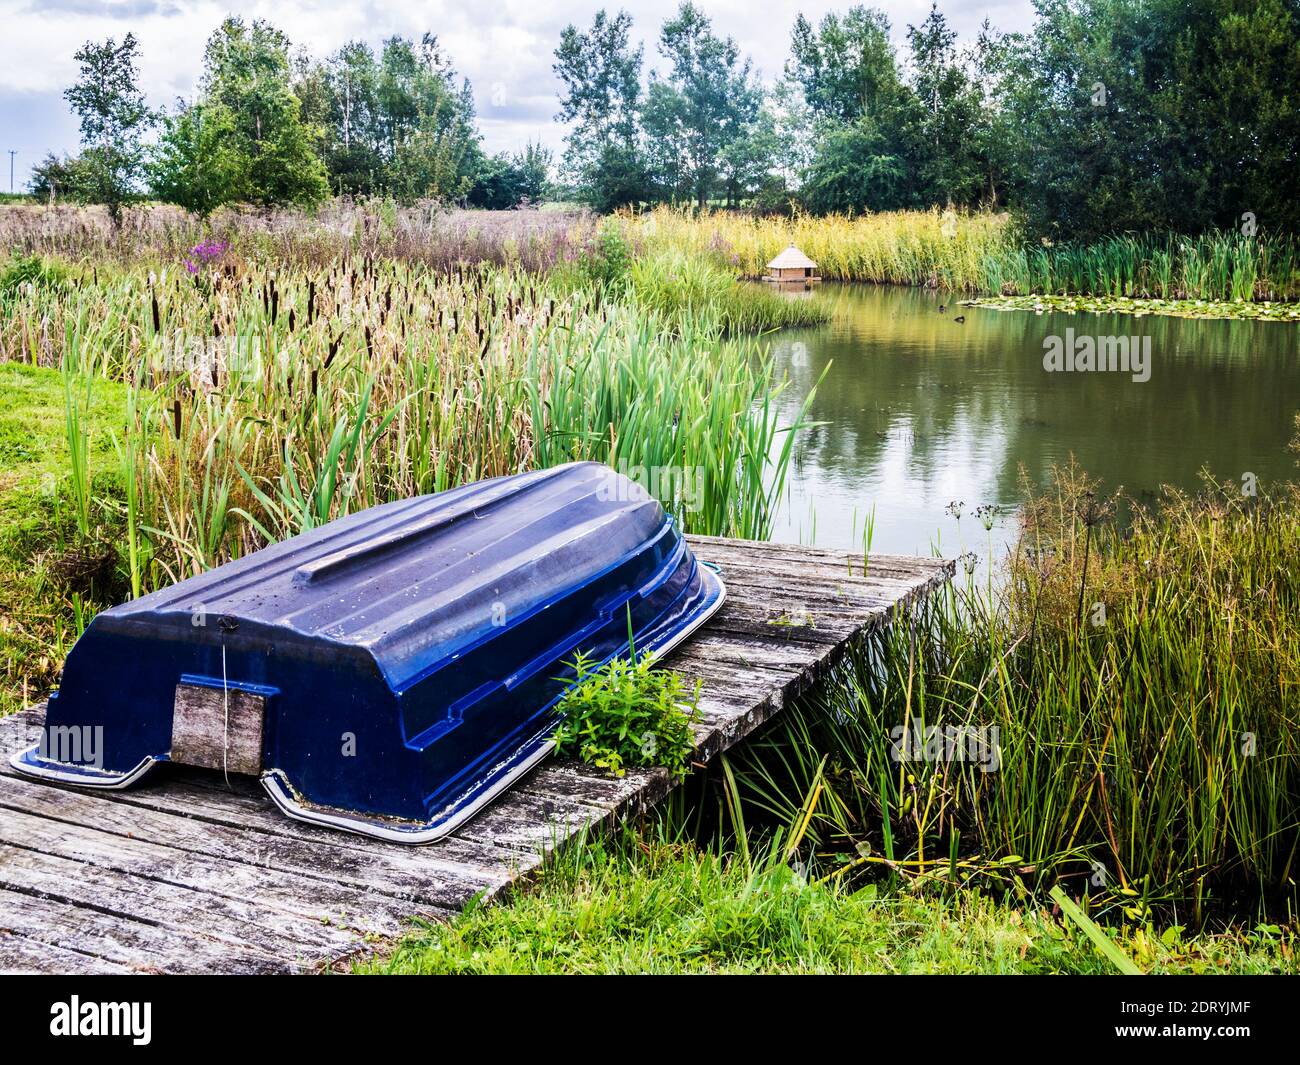 https://c8.alamy.com/comp/2DRYJMF/an-upturned-rowing-boat-on-a-jetty-by-a-pond-with-a-wooden-duck-house-beyond-2DRYJMF.jpg